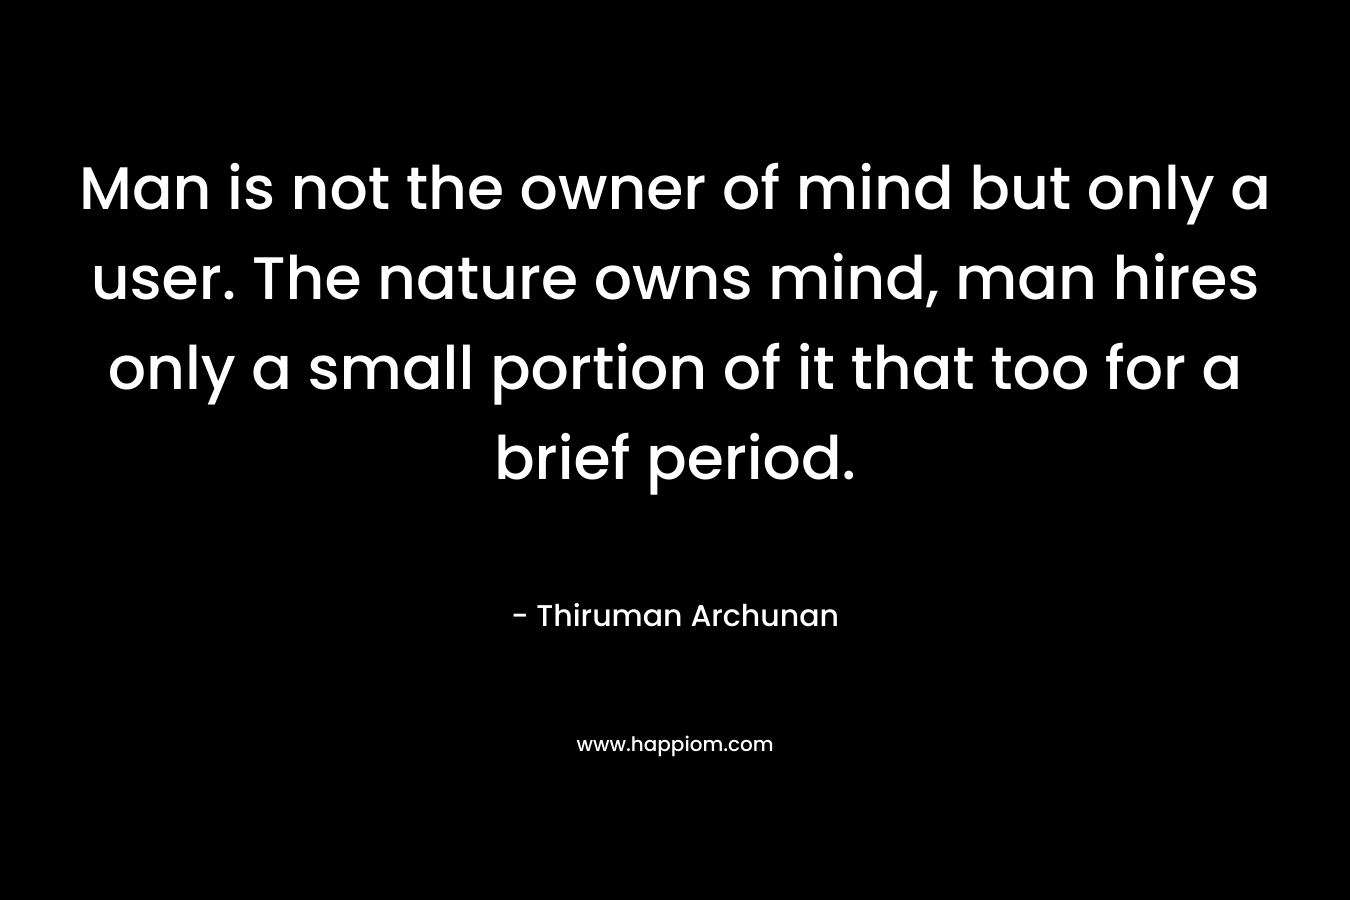 Man is not the owner of mind but only a user. The nature owns mind, man hires only a small portion of it that too for a brief period.